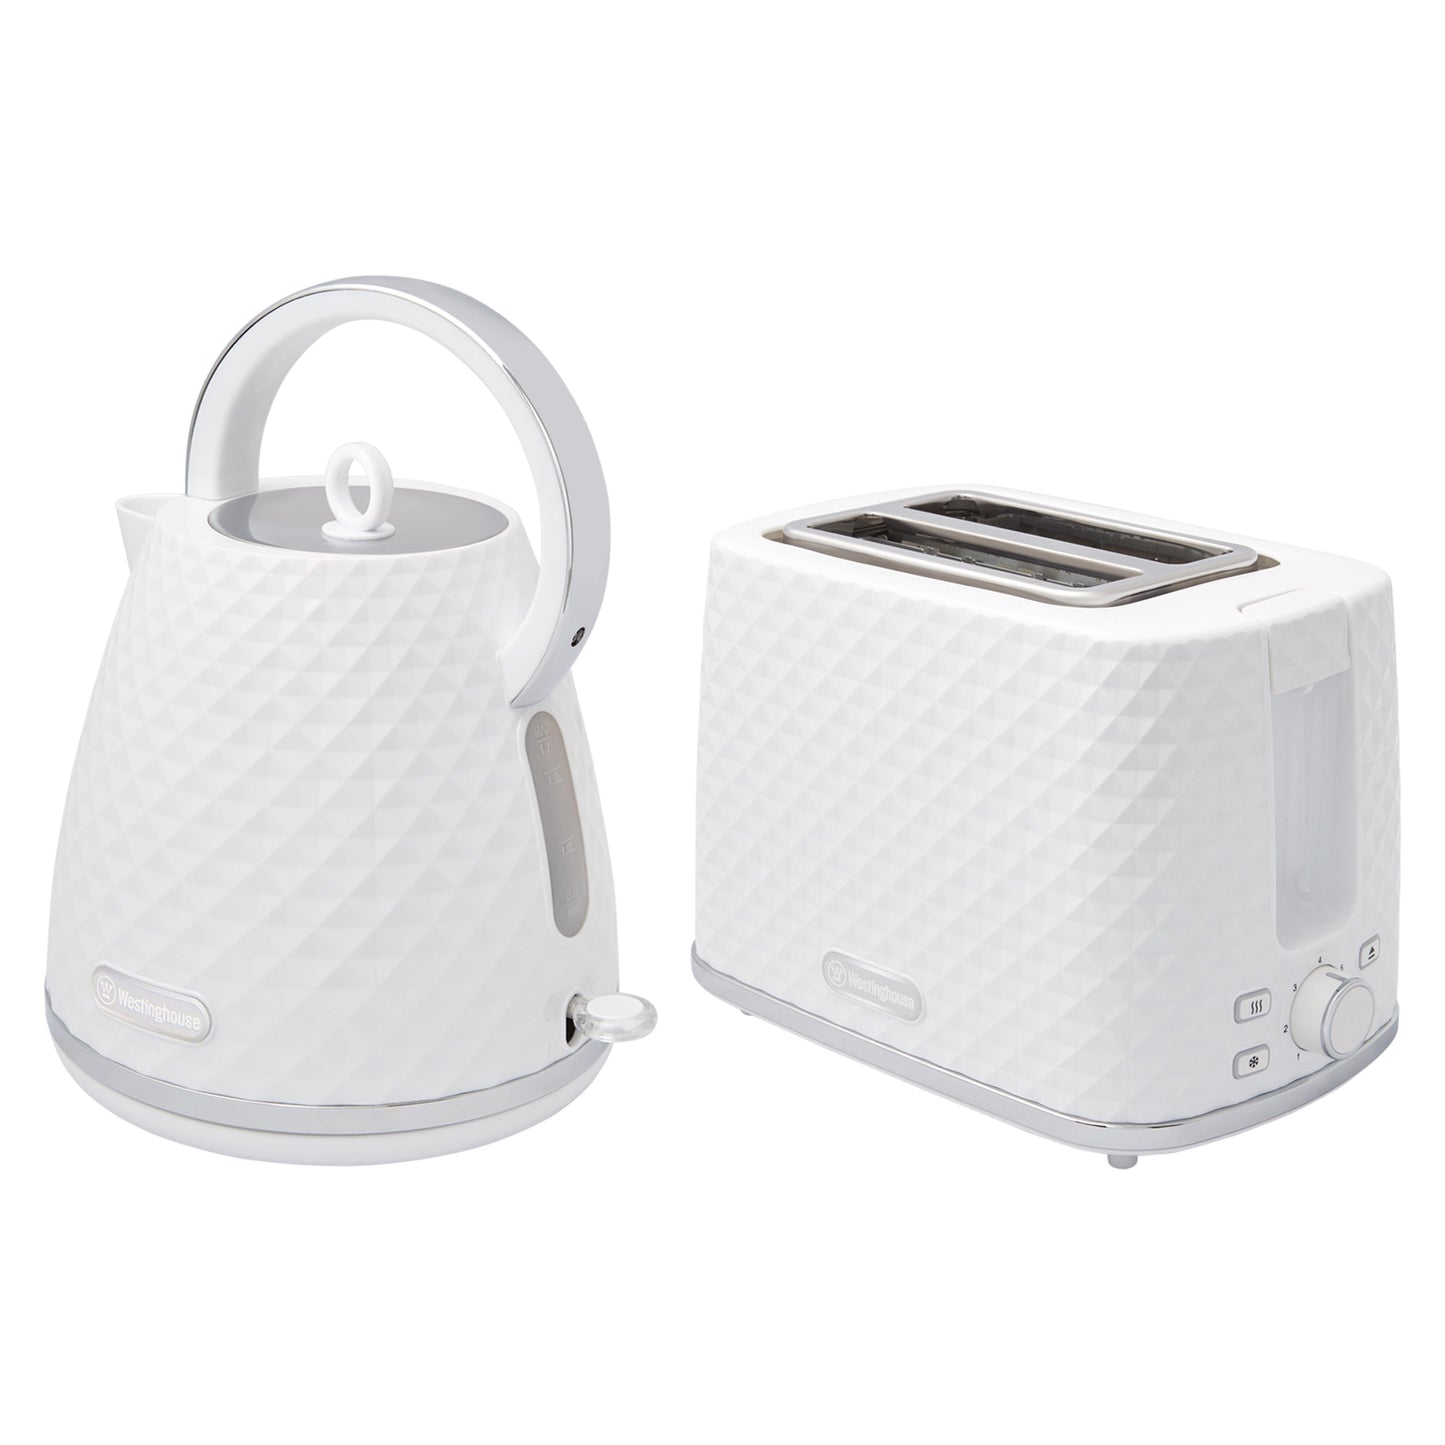 Westinghouse Kettle and Toaster Pack White Diamond 1.7L Kettle, 2 Slice Toaster